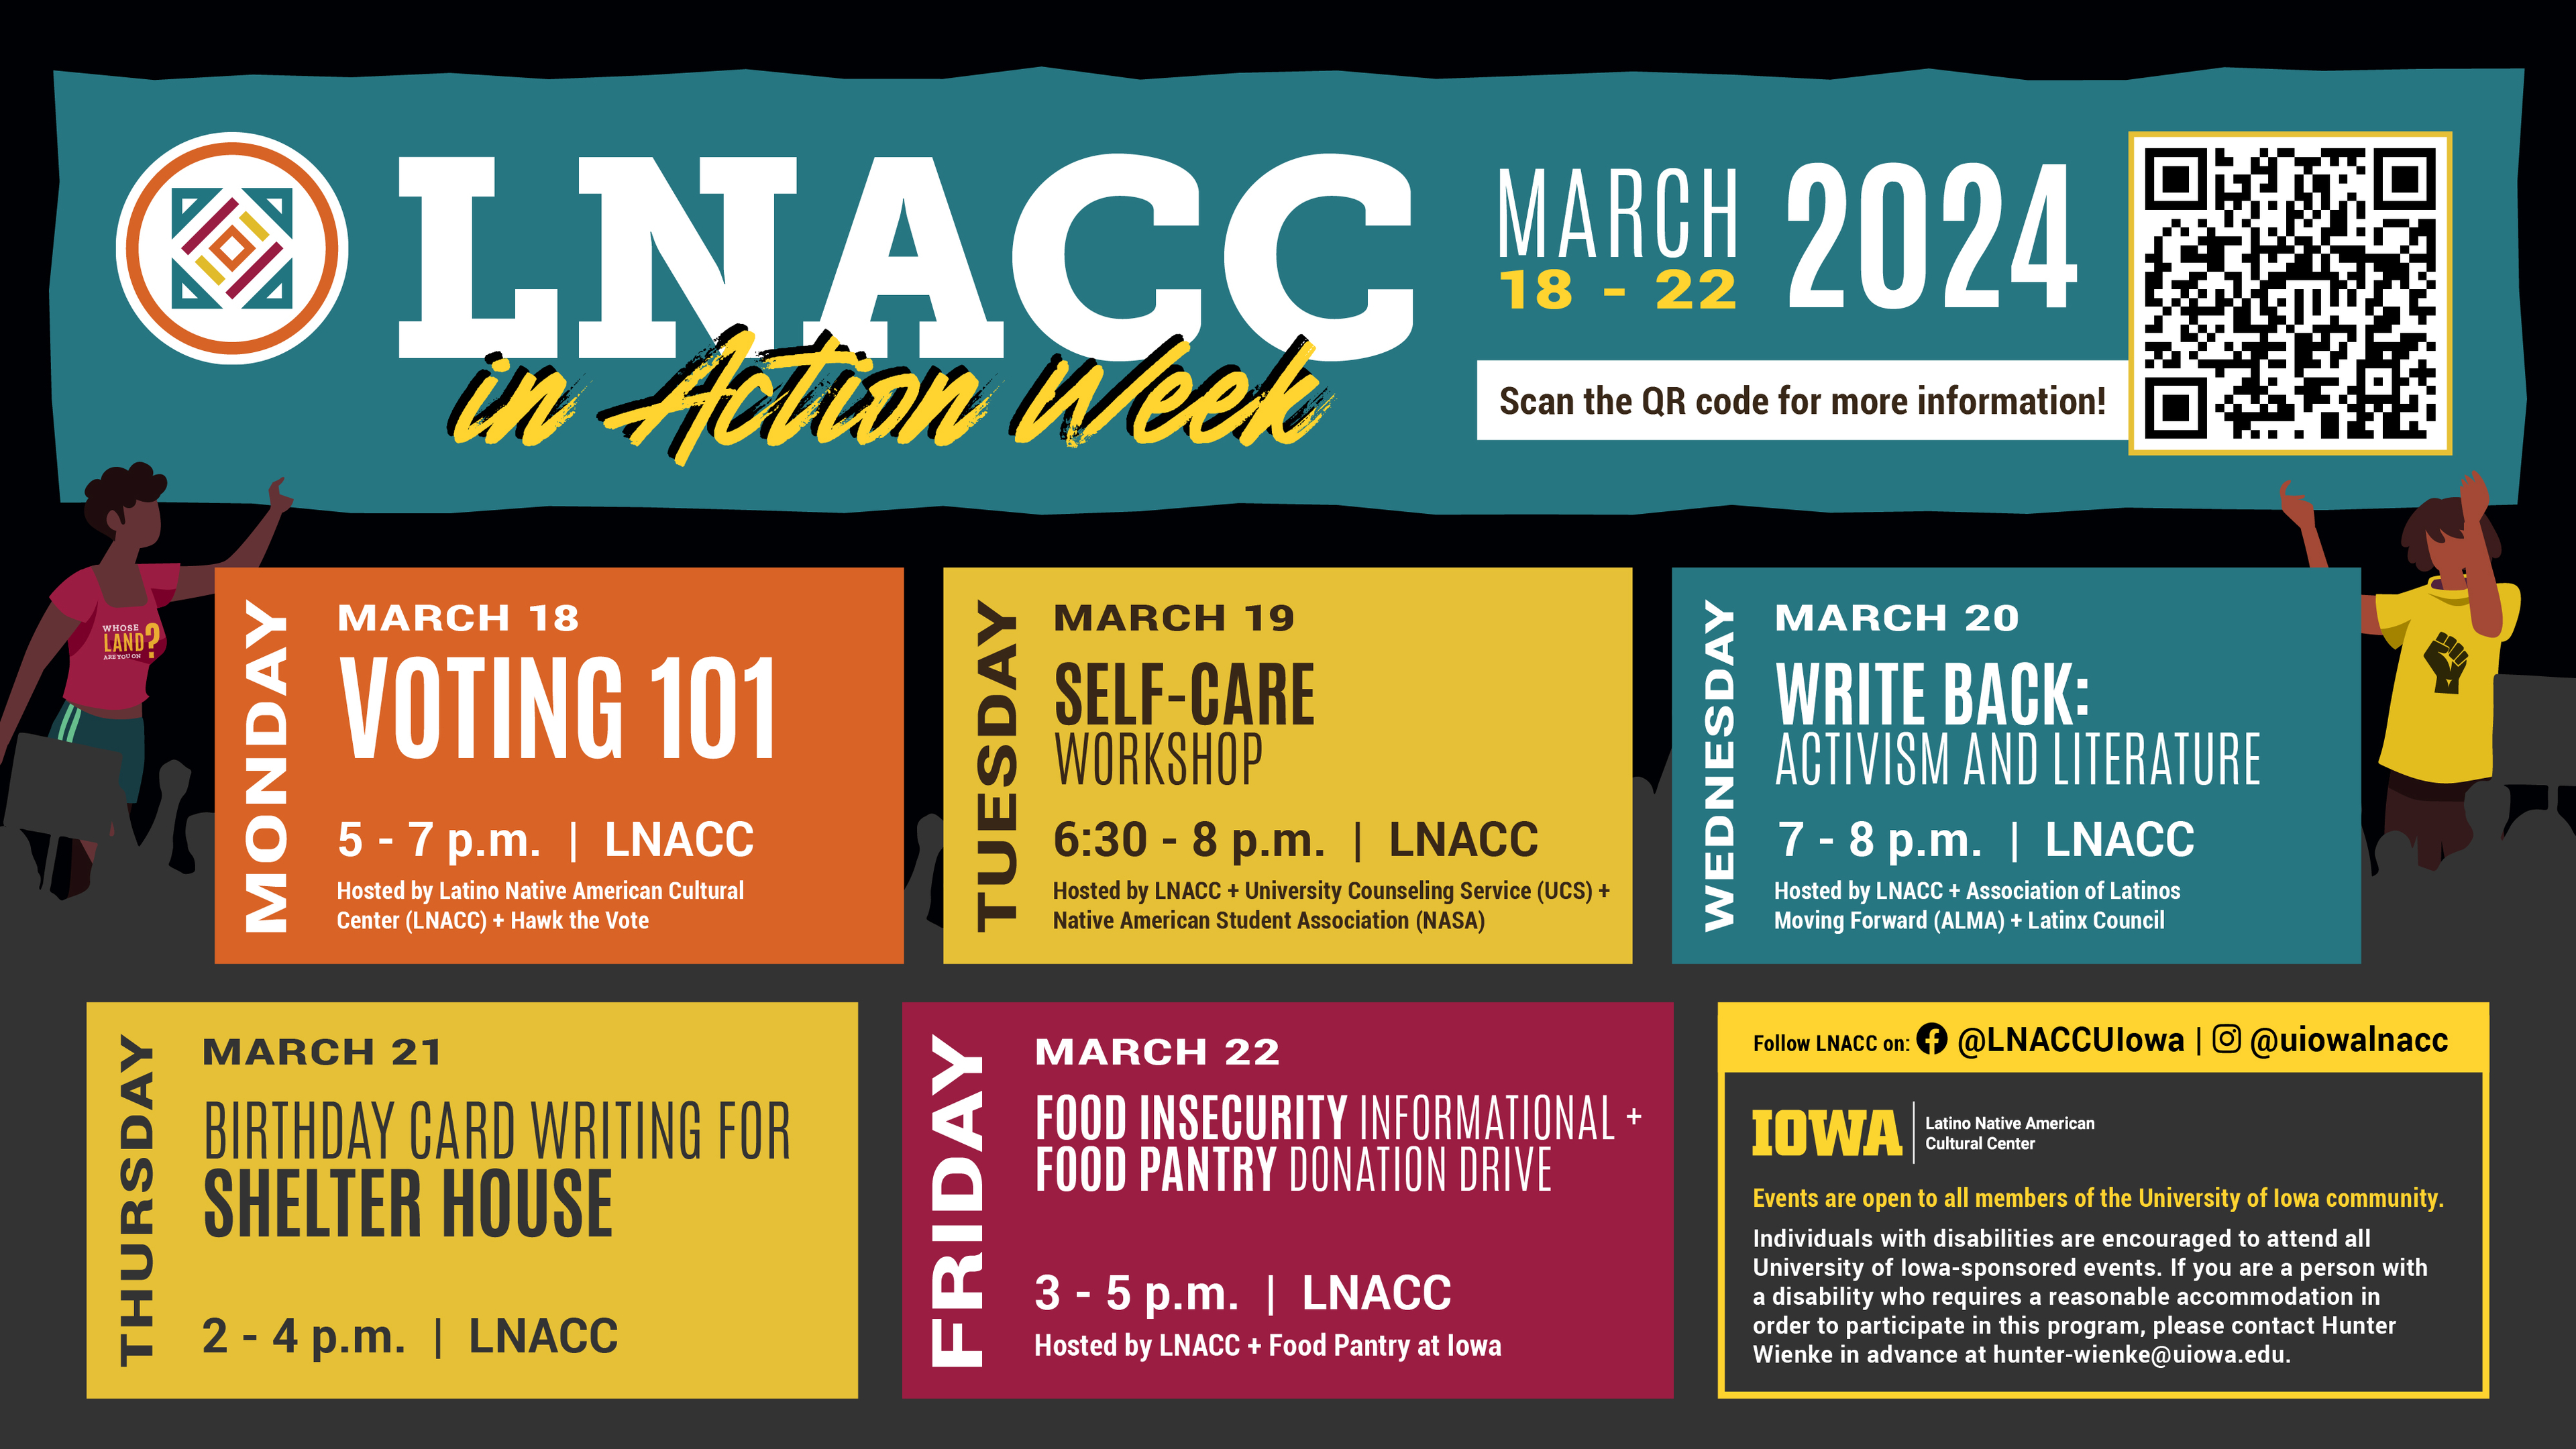 LNACC in Action Schedule (March 18-22): Monday: Voting 101, Tuesday:Self-Care, Wednesday: Write Back, Thursday: Birthday Card writing for shelter house, Friday: Food Insecurity